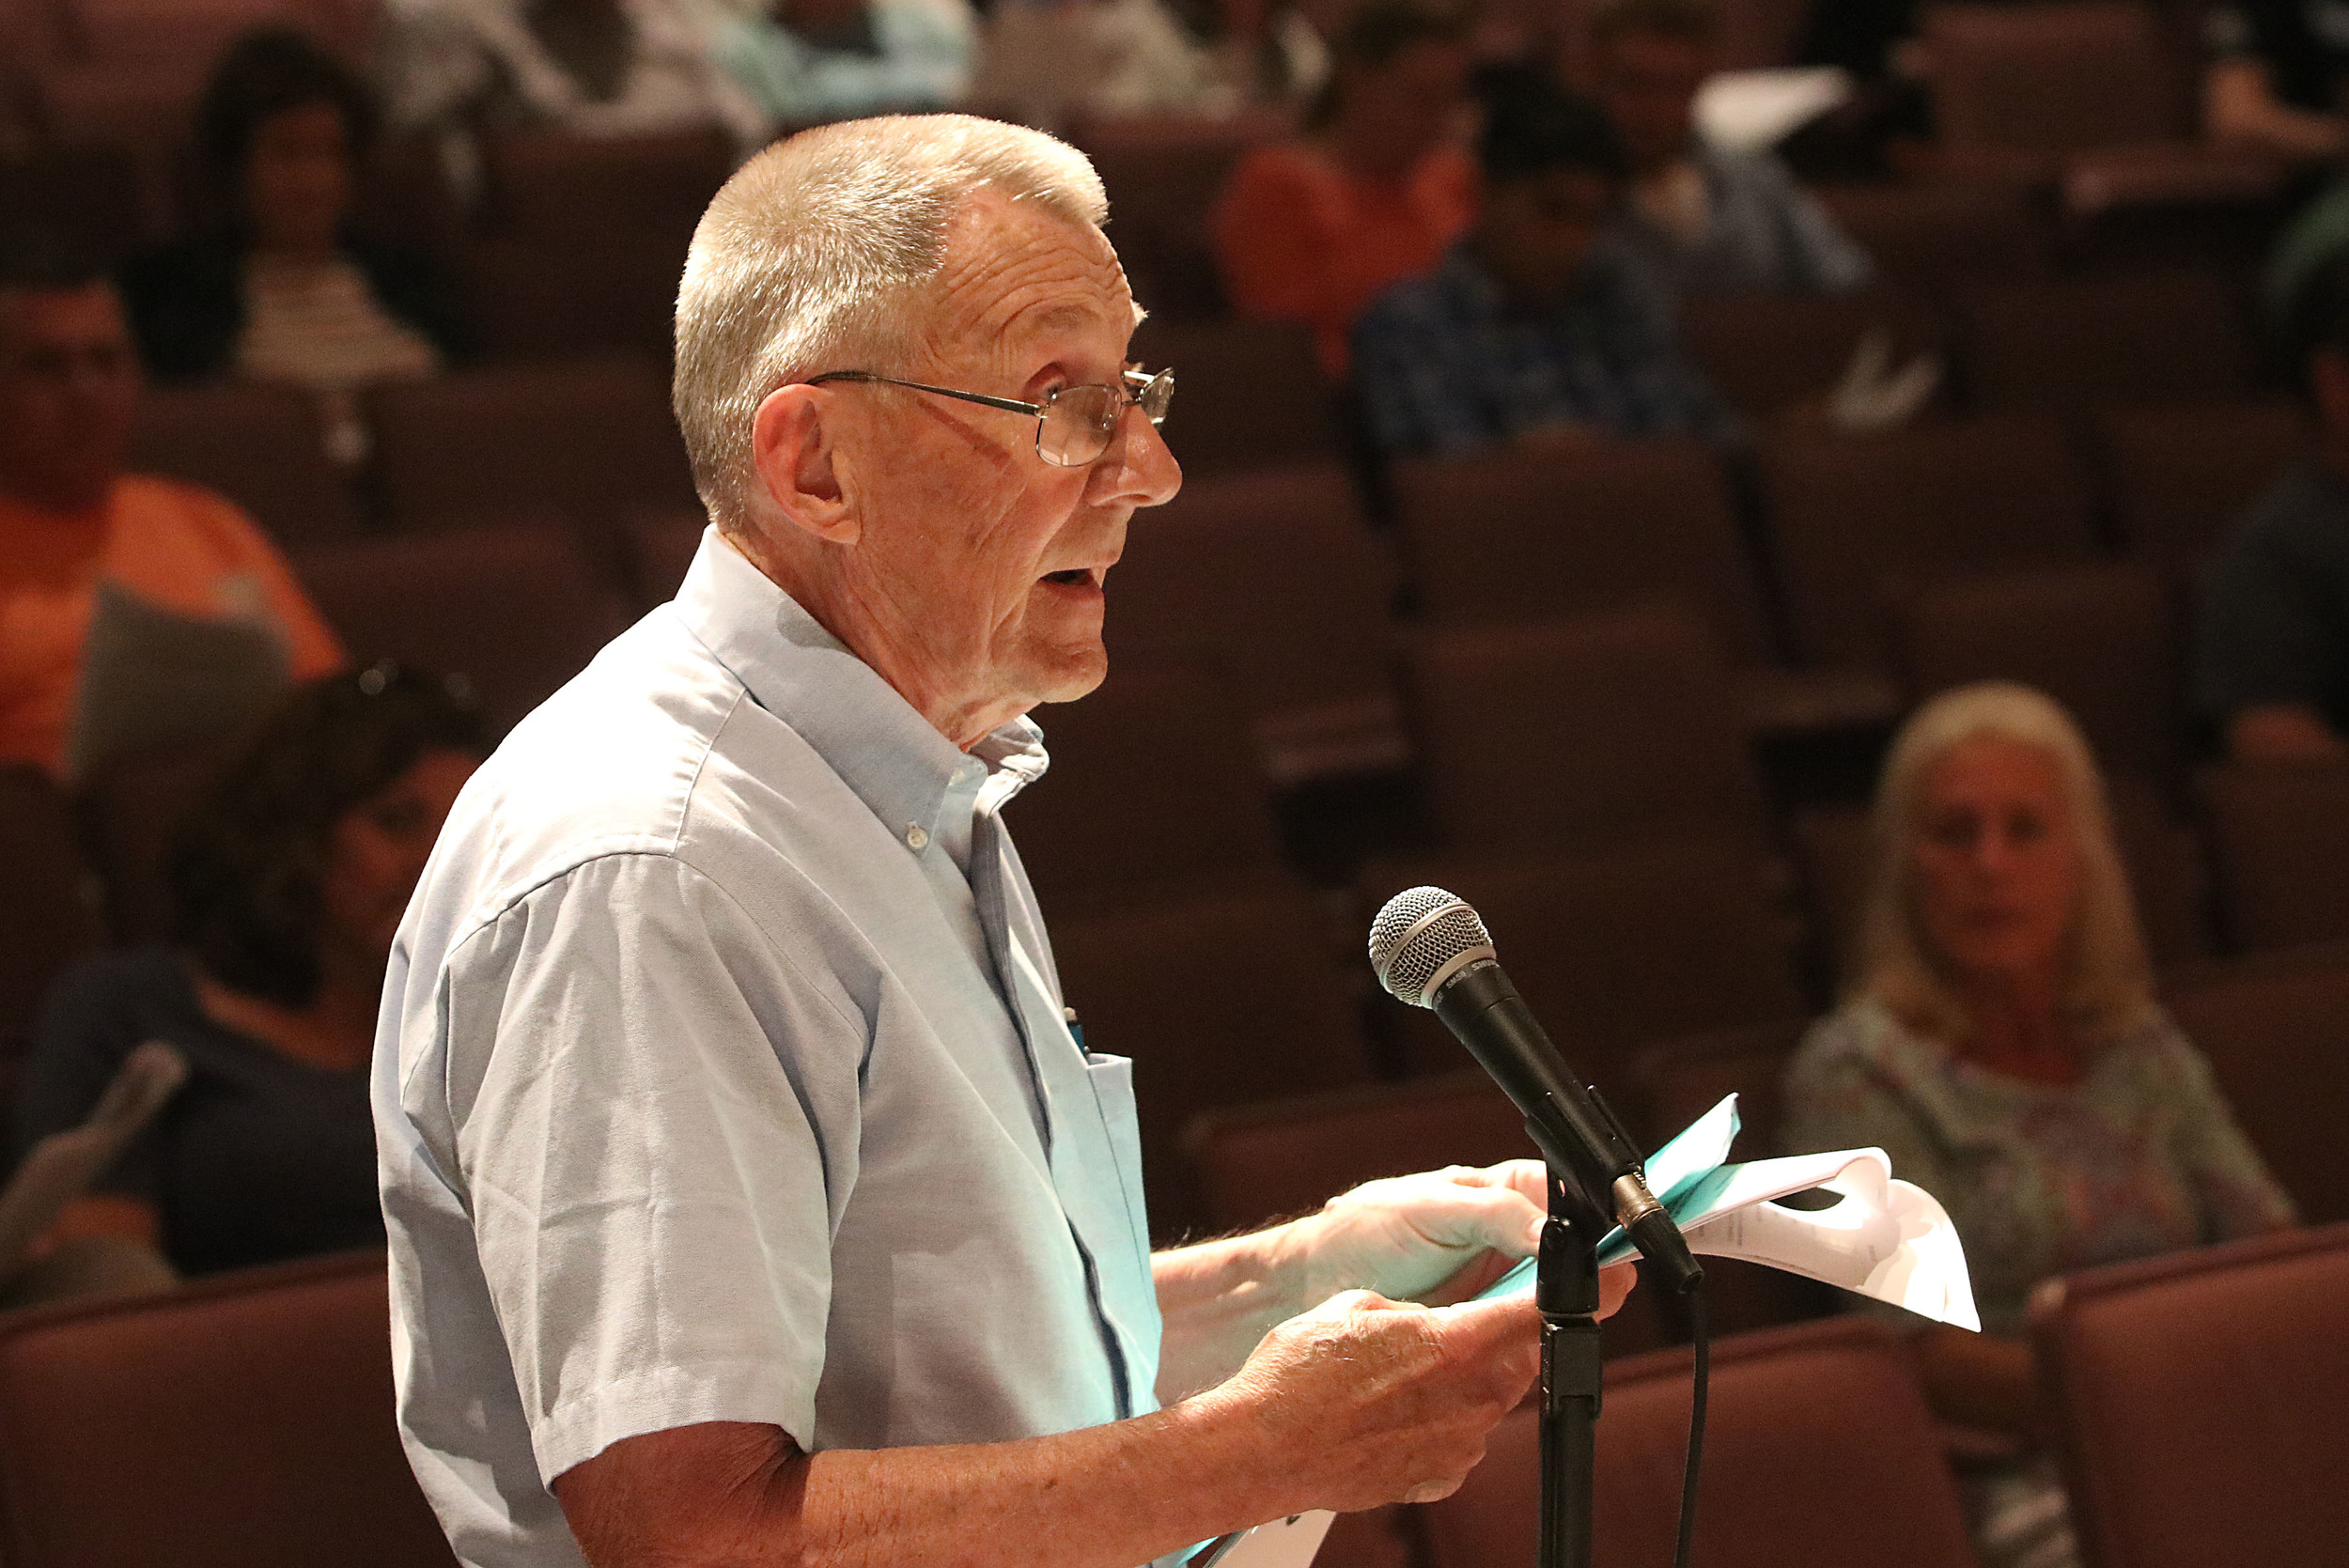 Barrington resident Peter Clifford explains his proposed $500,000 cut to the budget, during Wednesday's financial town meeting.